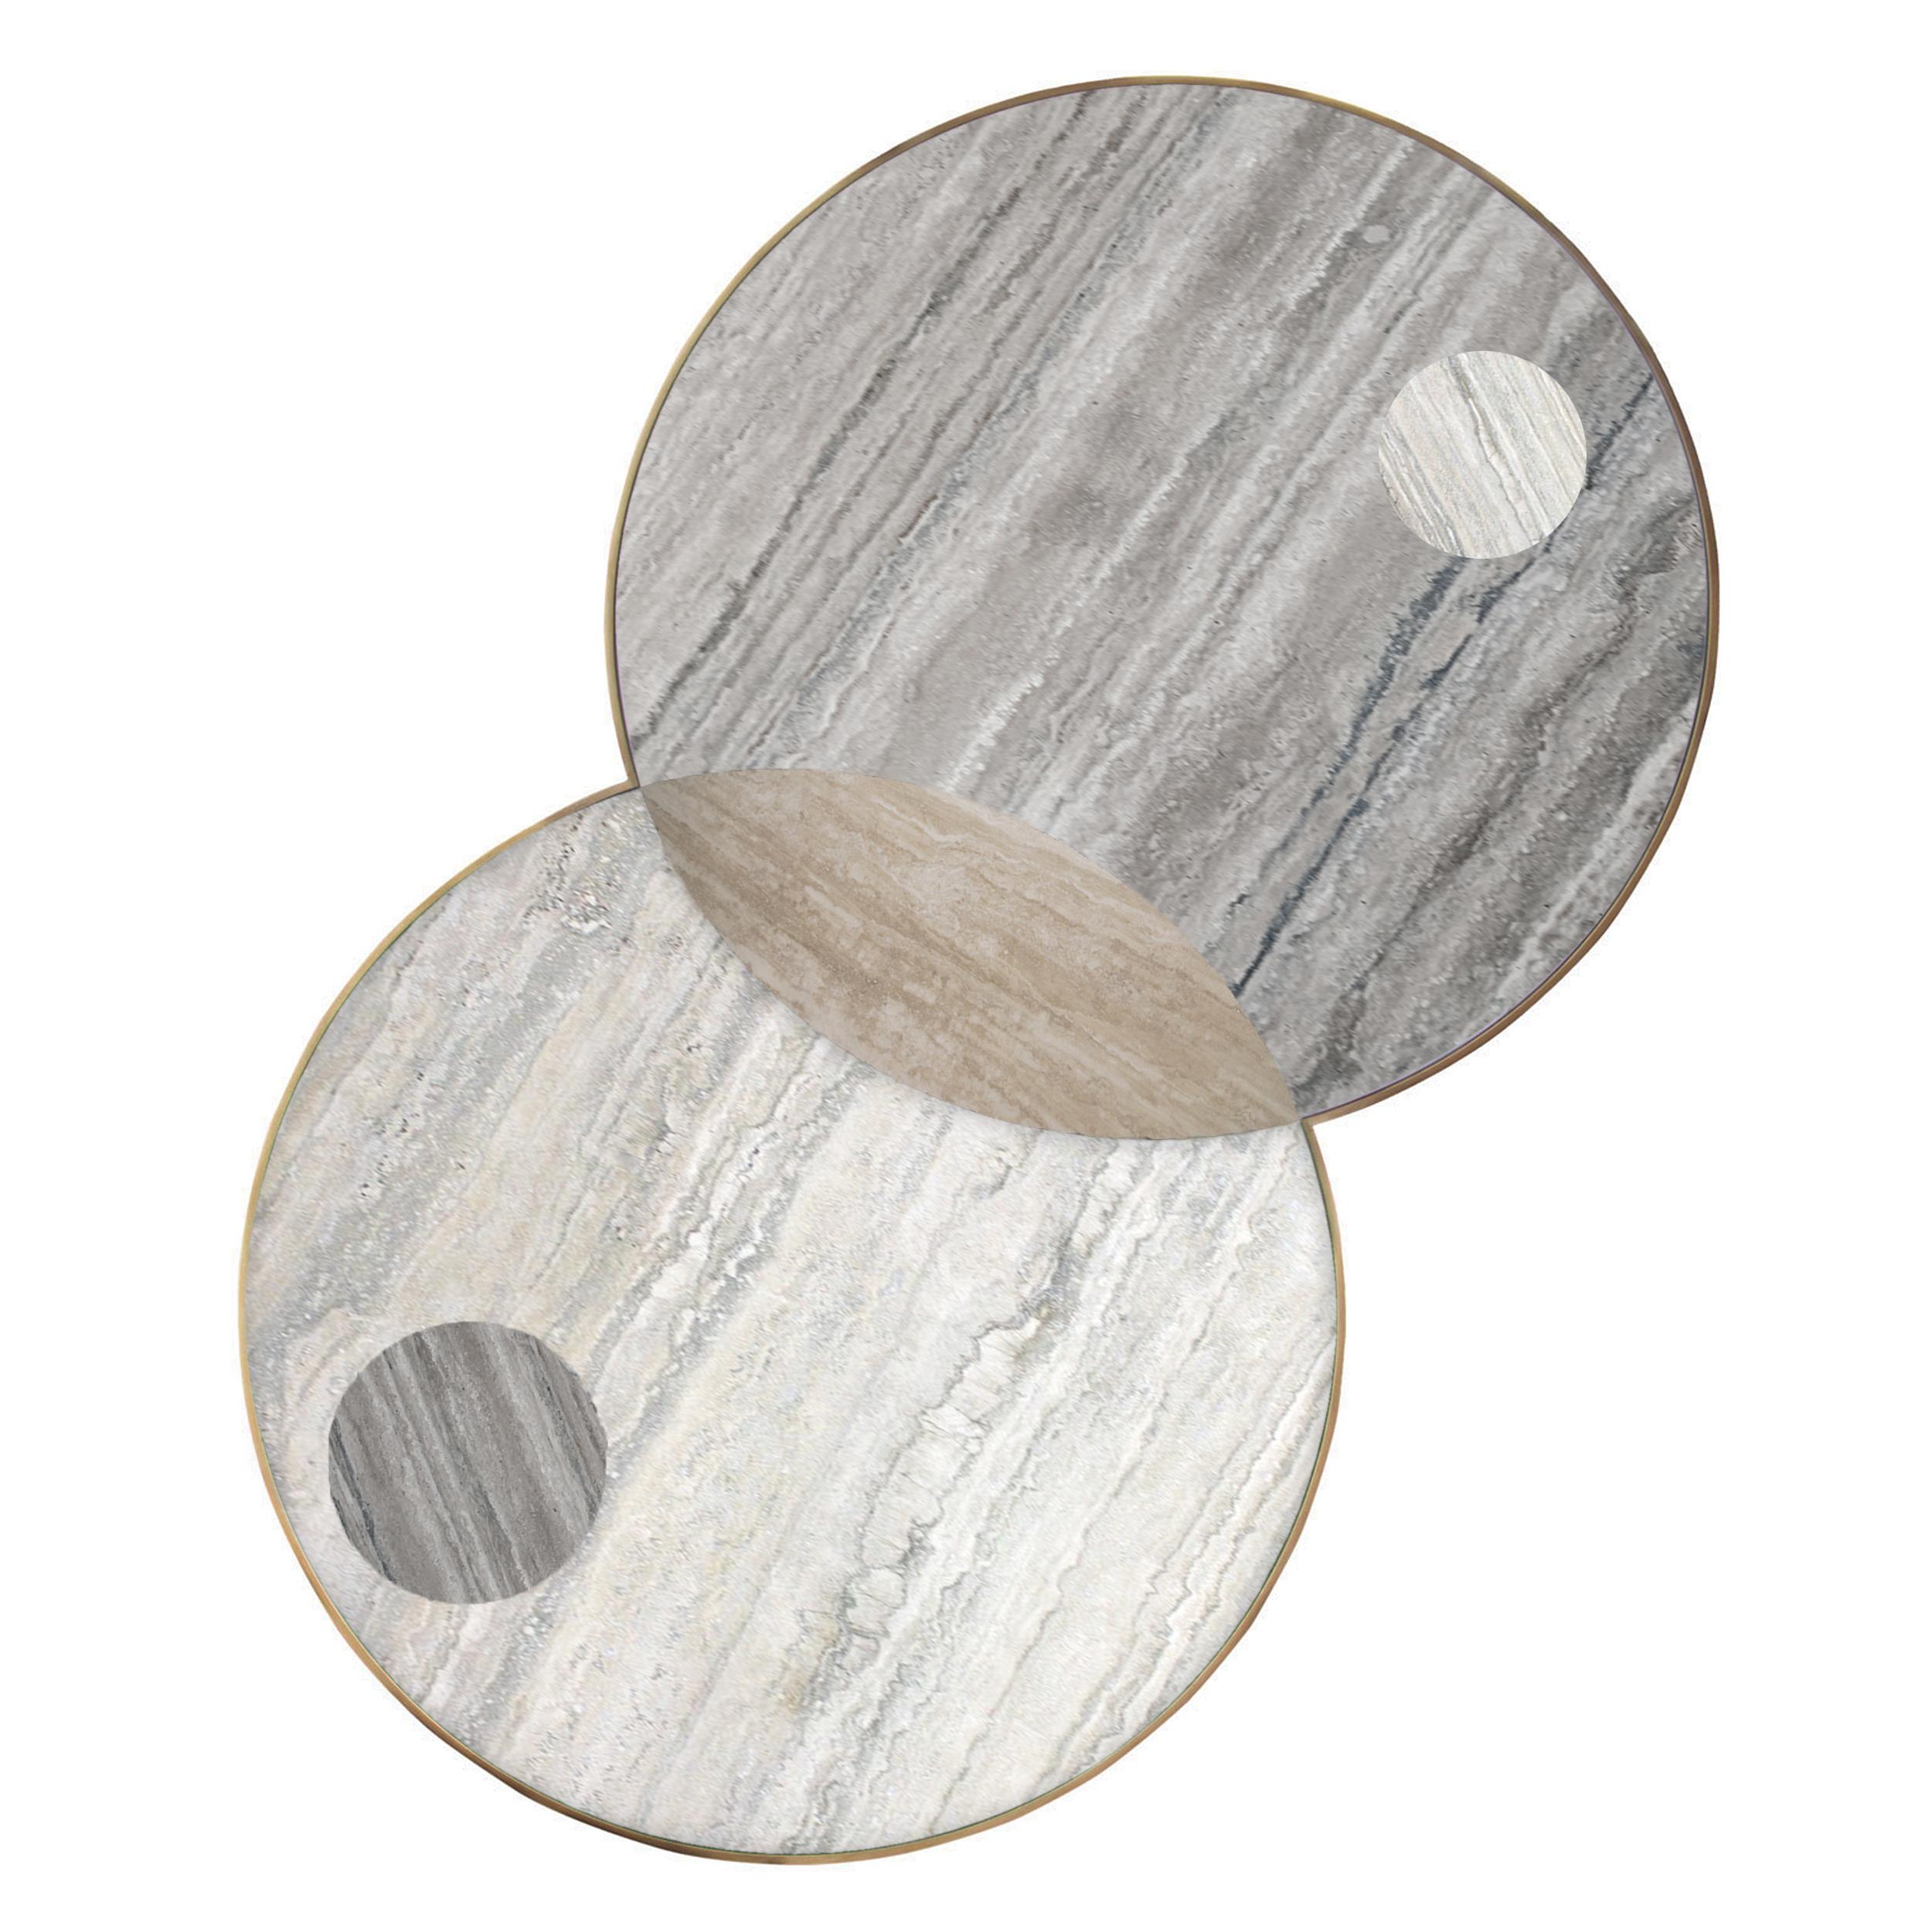 The Lunar Collection consists of the Half Moon dining table, the Sun and Moon coffee table and the Full Moon side table. Discs echoing planetary forms are bisected or overlaid to create surface patterns and structural elements, forming